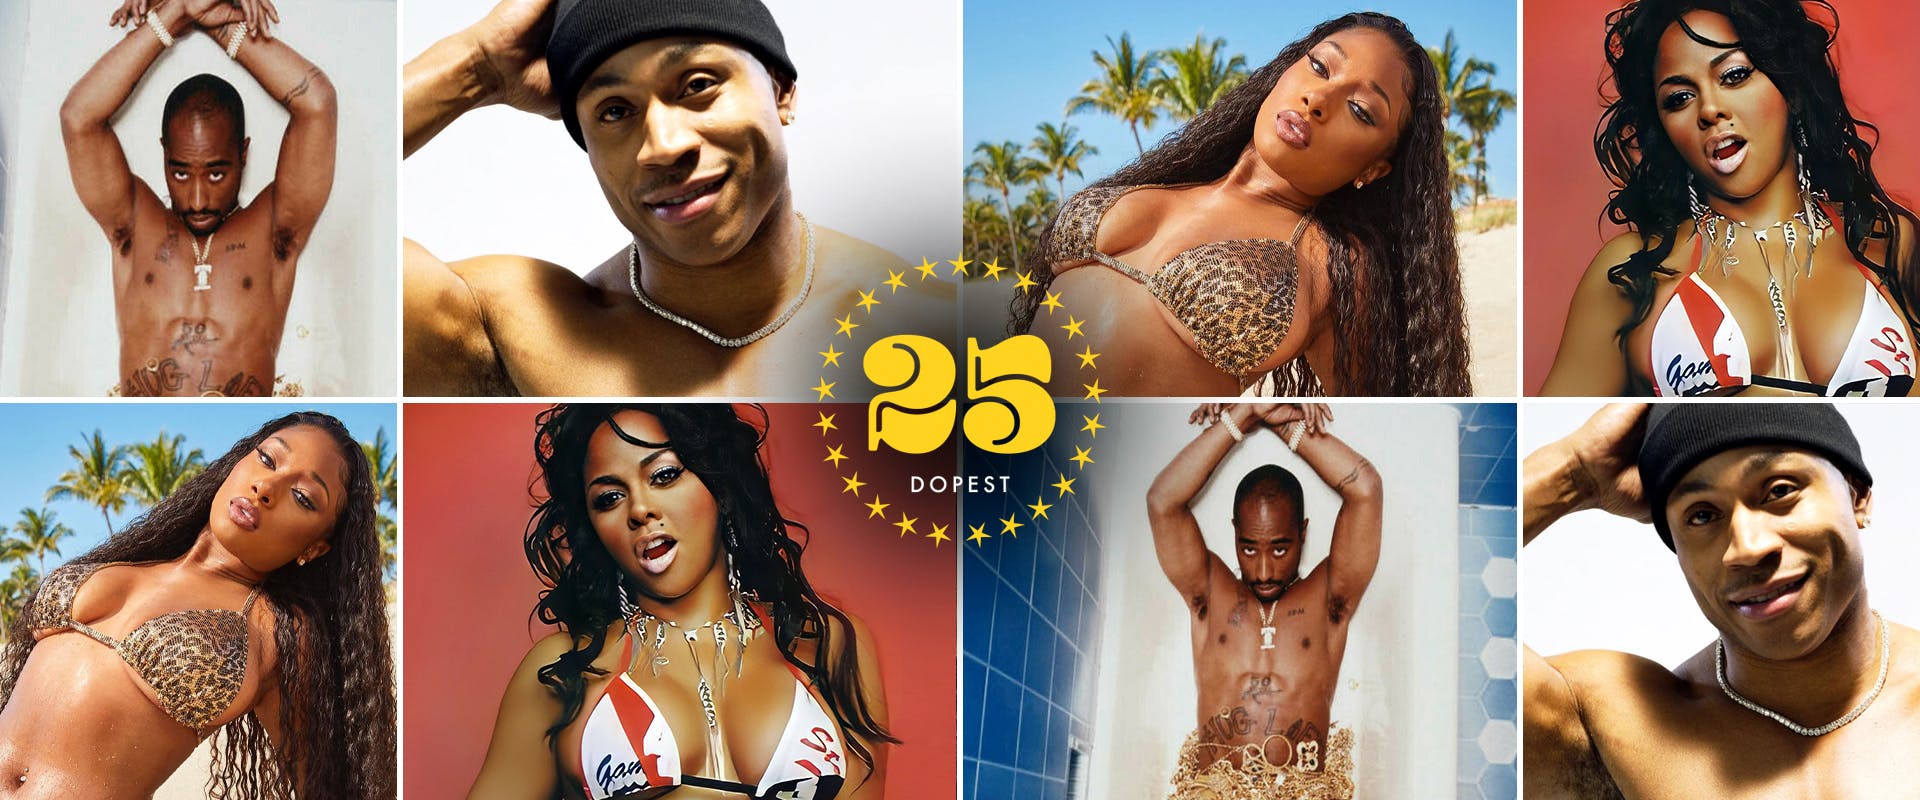 How Many Licks: The 25 Dopest Rap Songs to F*** To